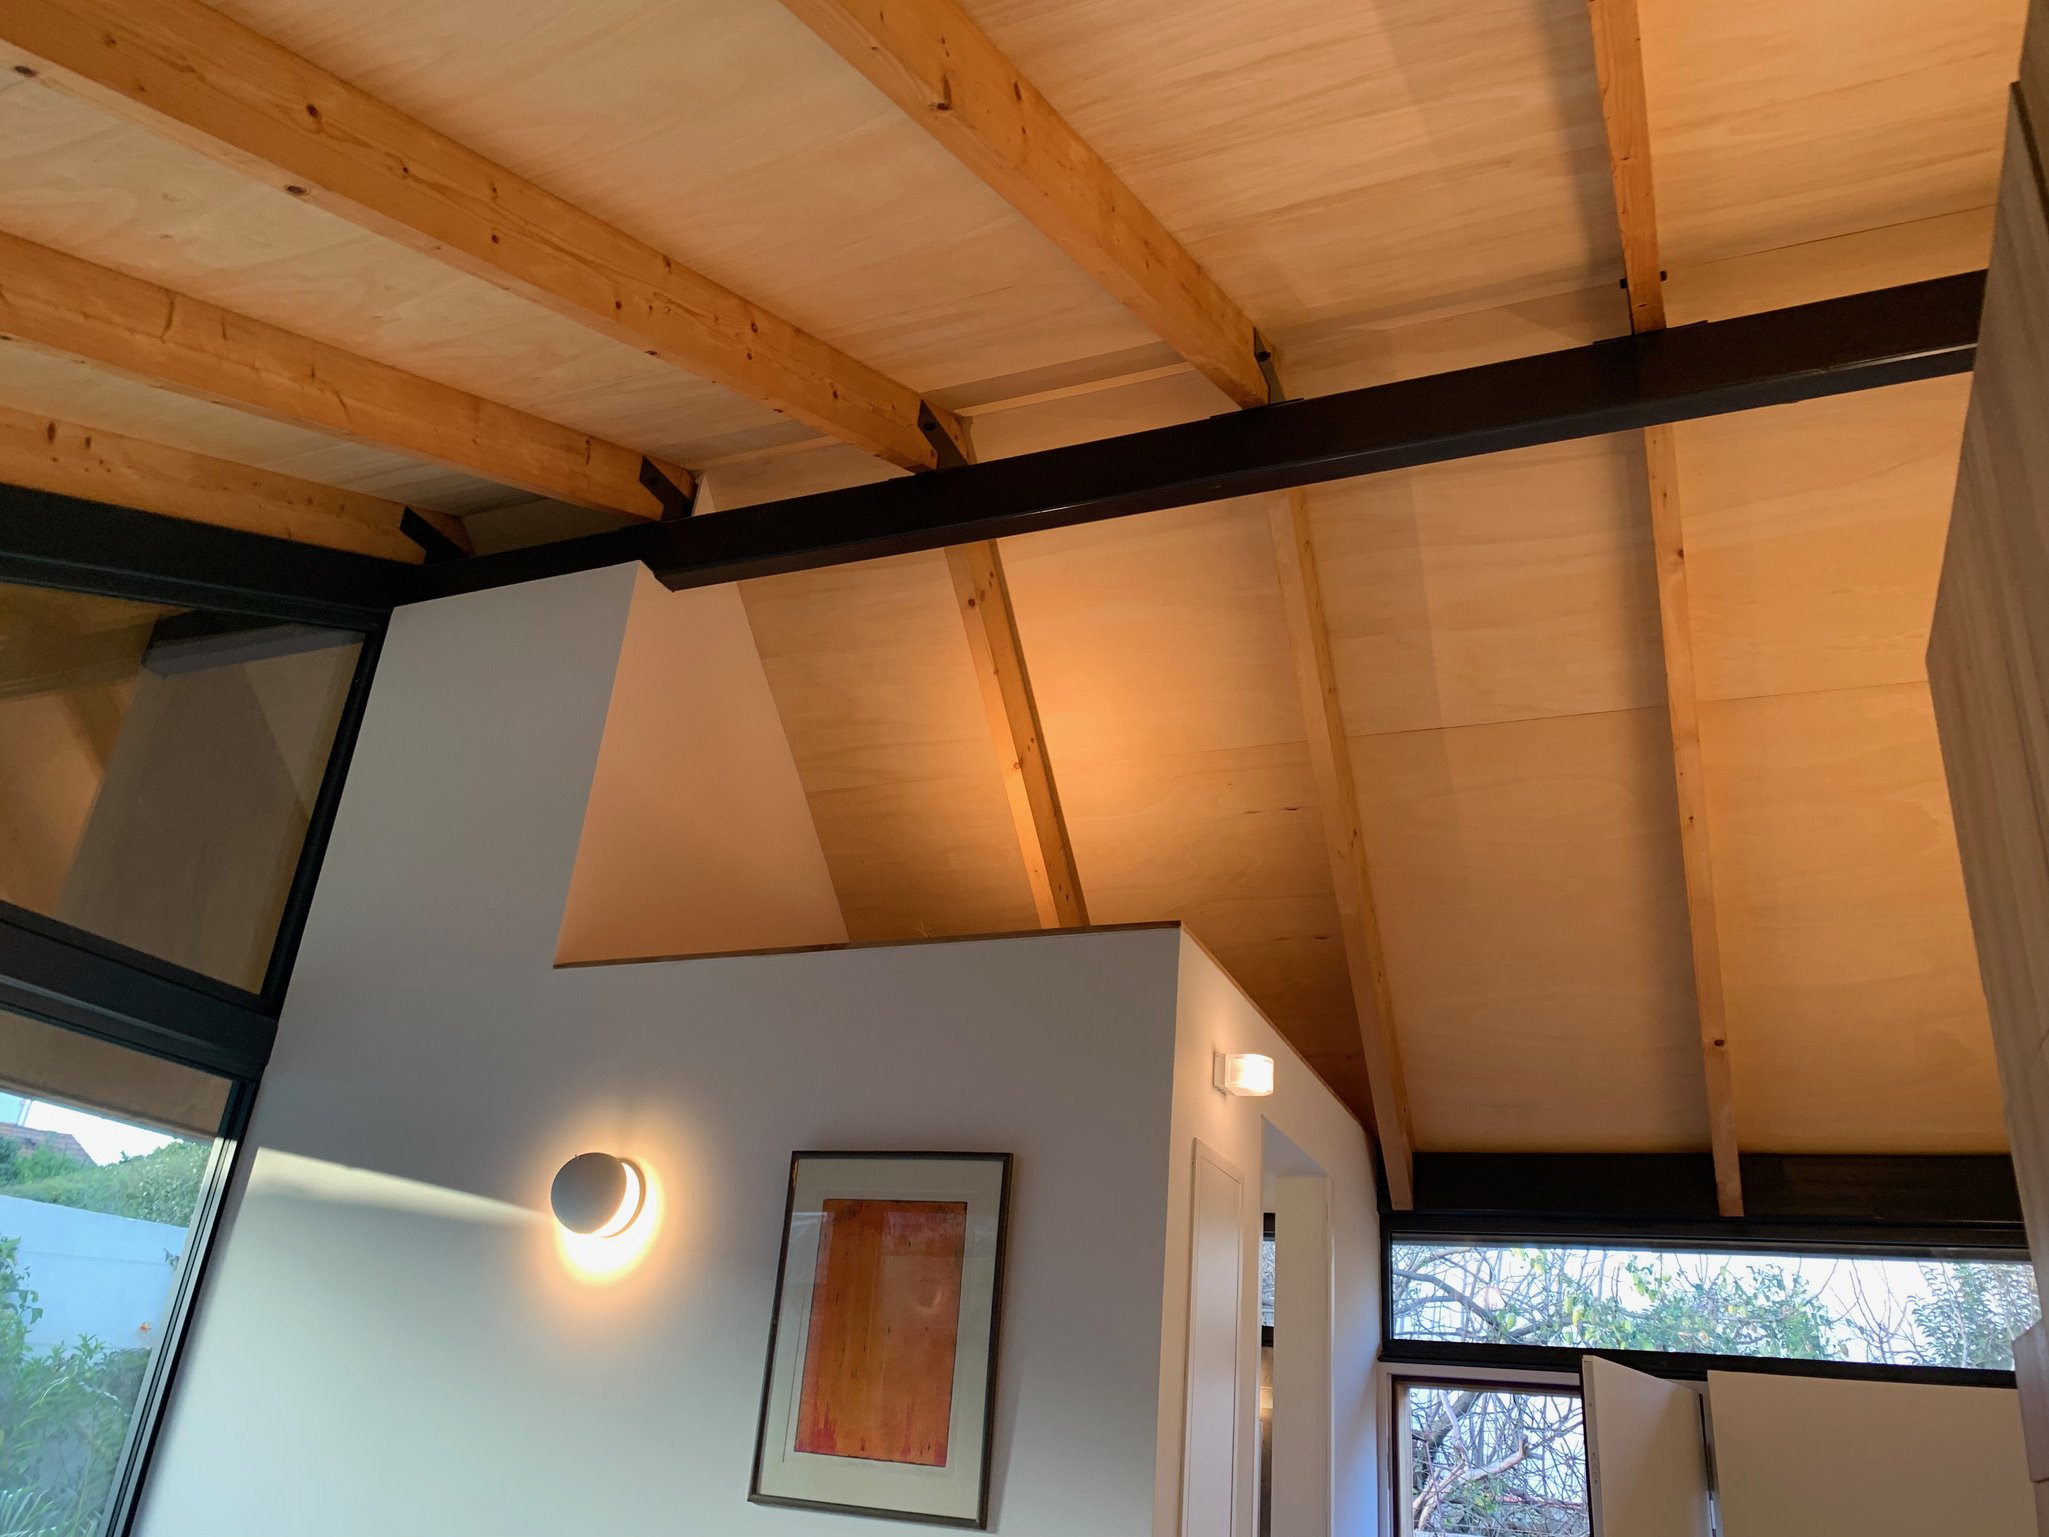 storage nook and the ceiling joists